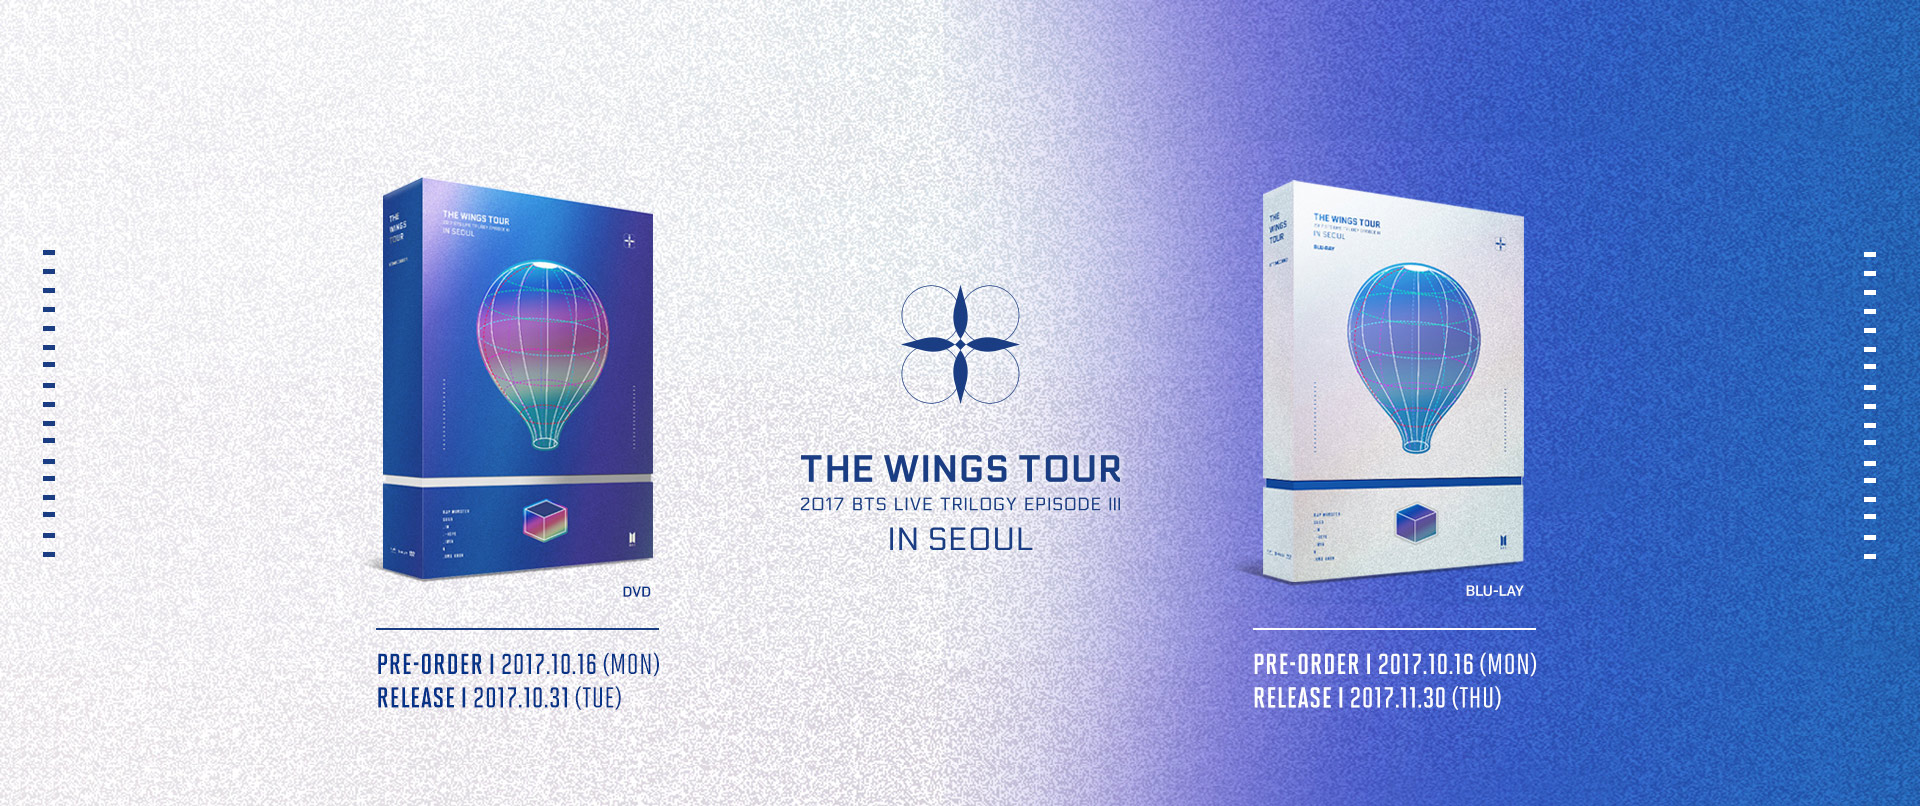 Info] 2017 BTS Live Trilogy EPISODE III THE WINGS TOUR in Seoul DVD   Blu-ray [171016] |